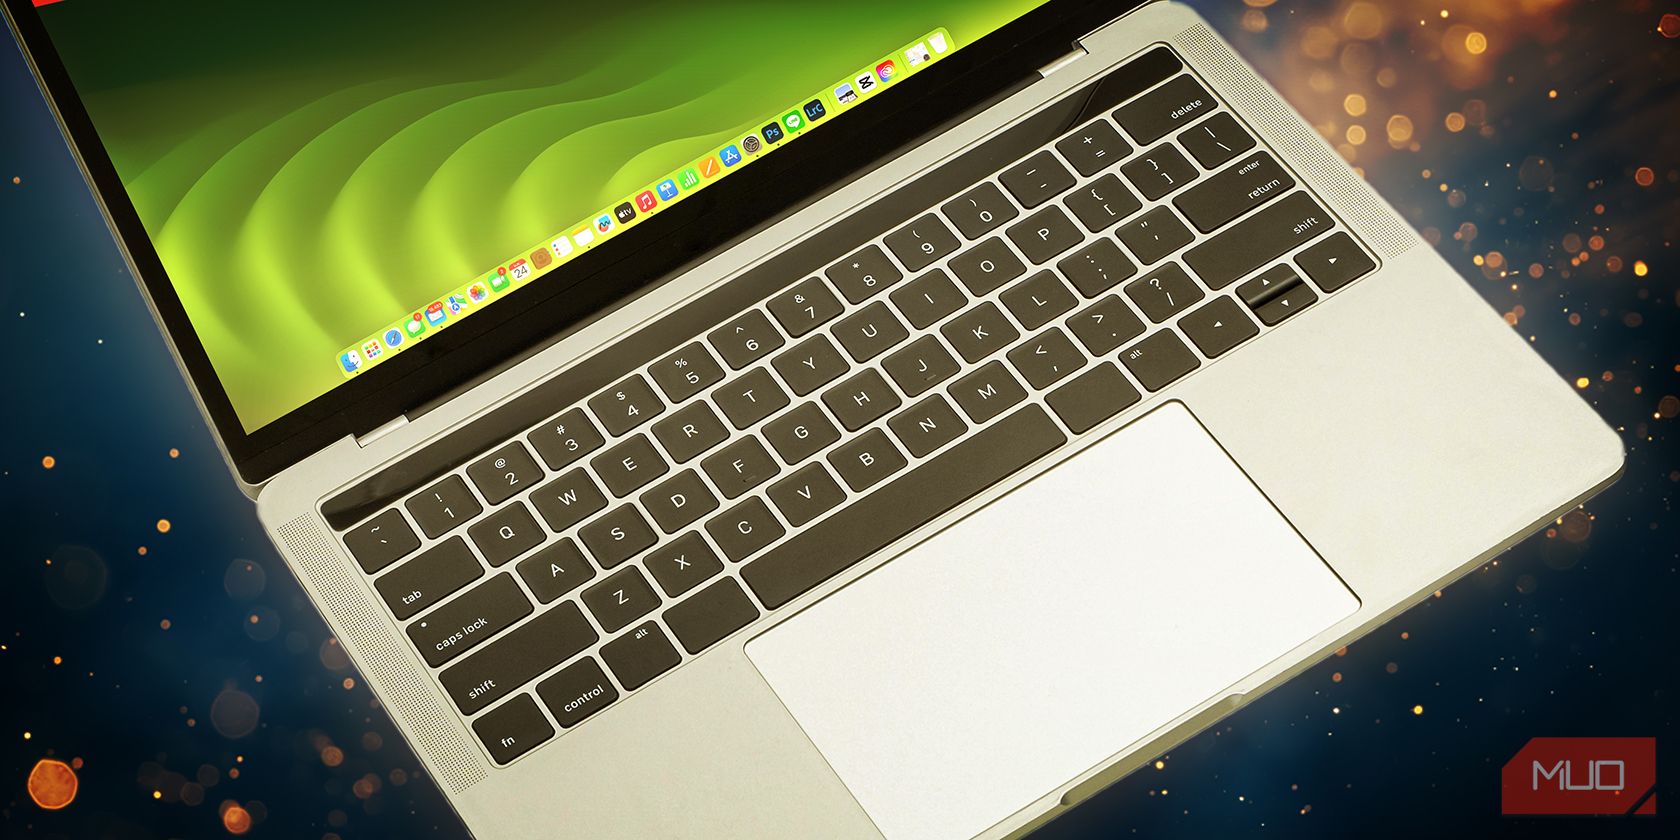 A laptop with an illuminated keyboard is set against a sparkling golden background, suggesting creativity or inspiration.